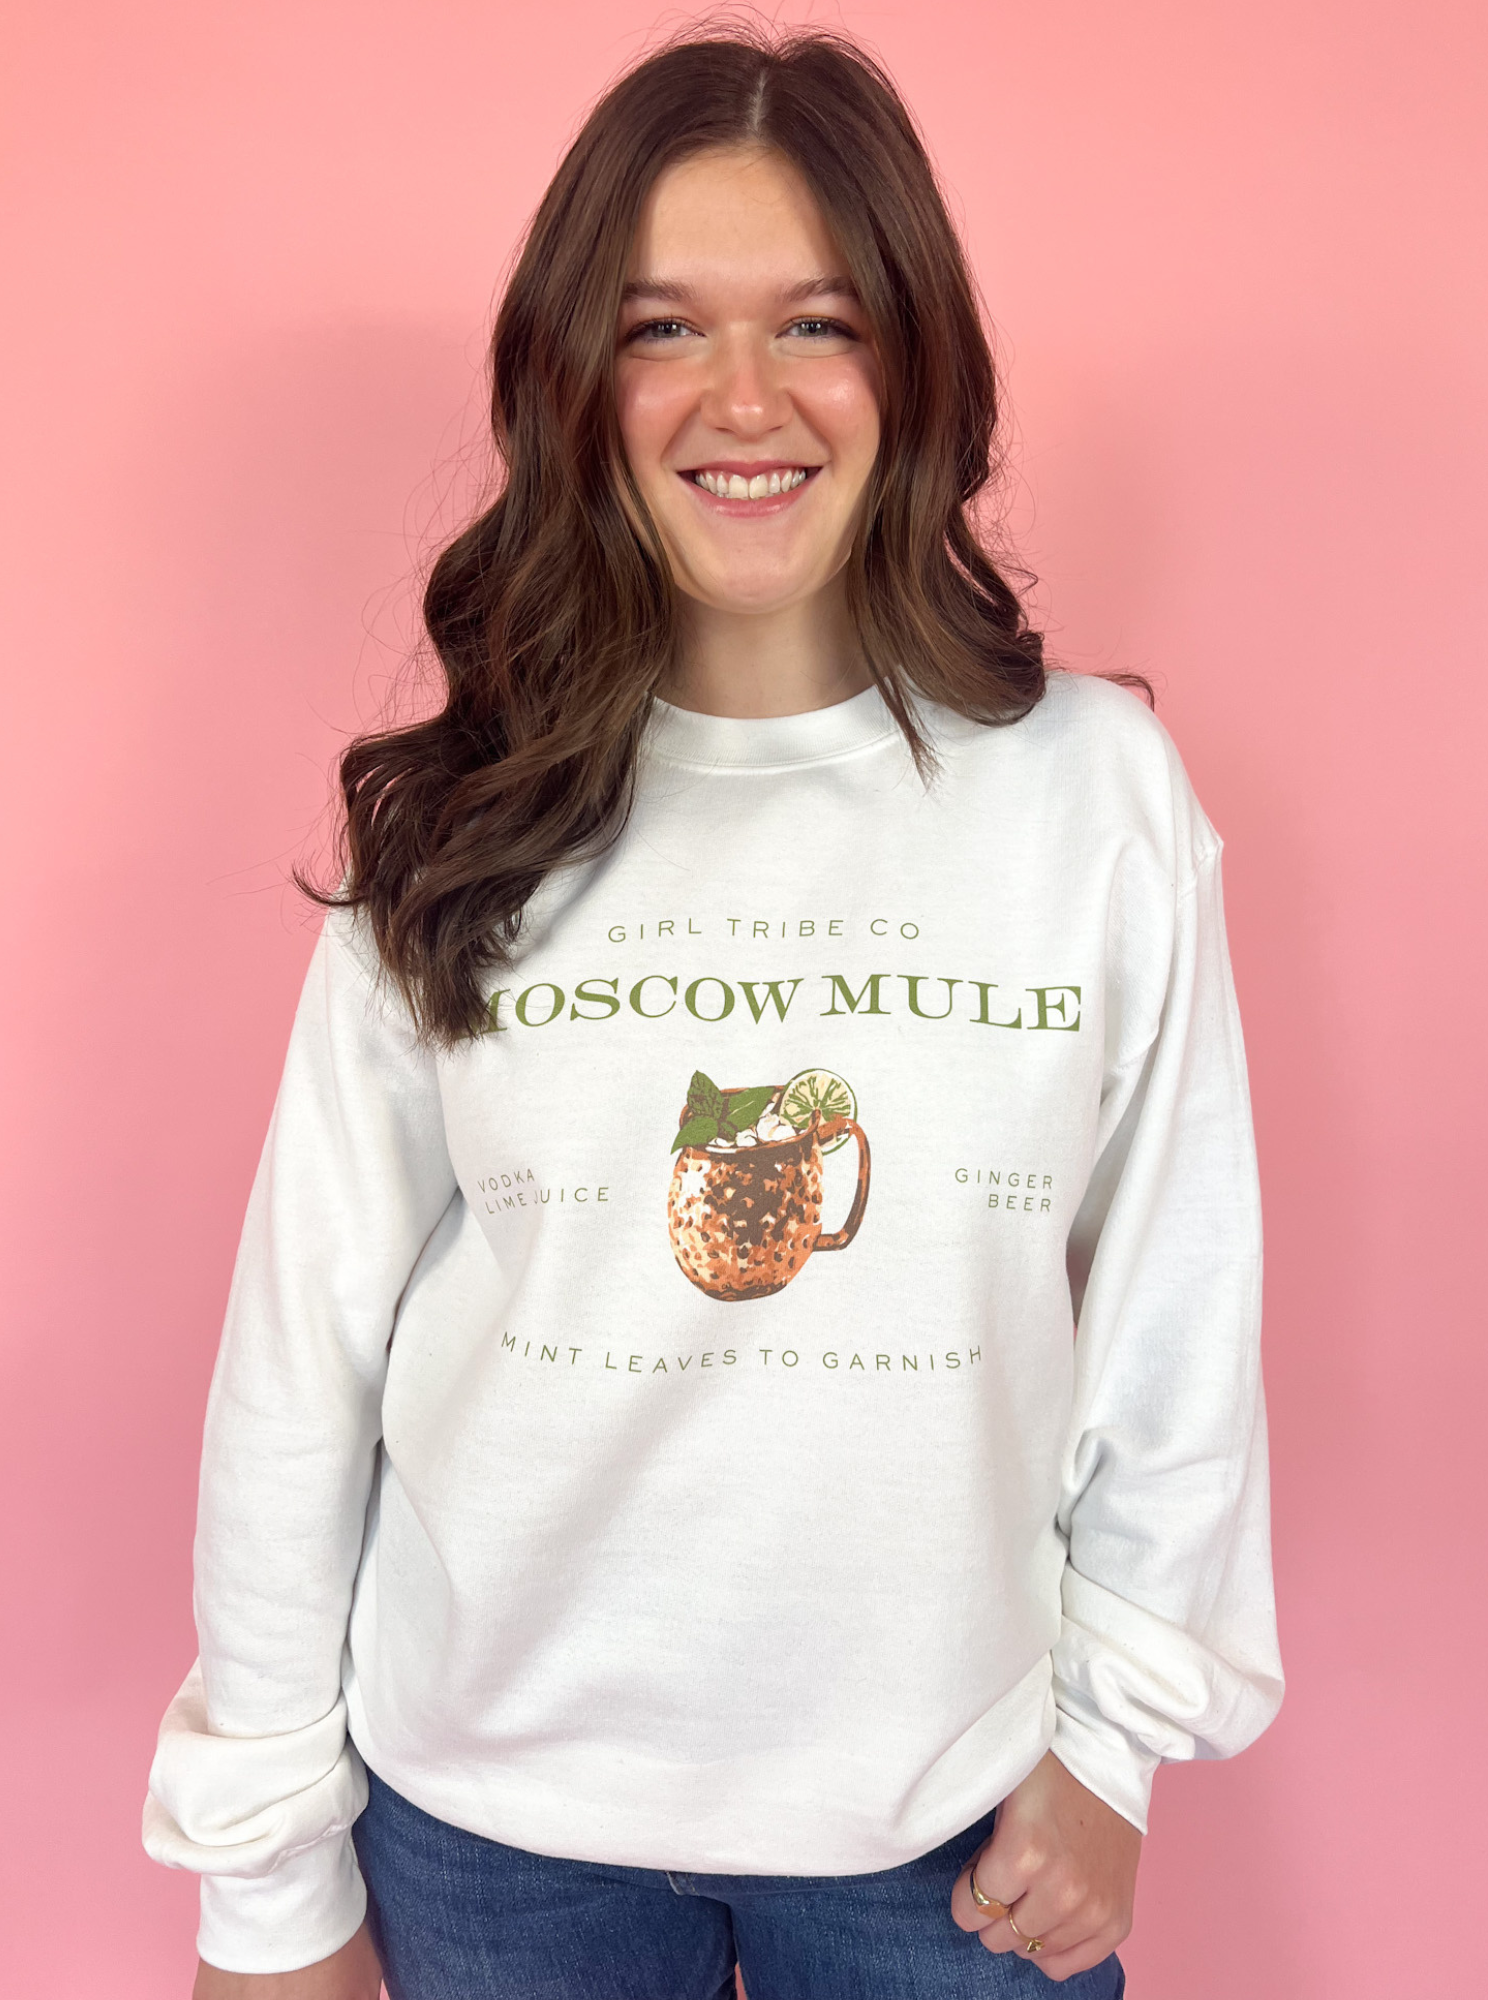 Moscow Mule Crewneck